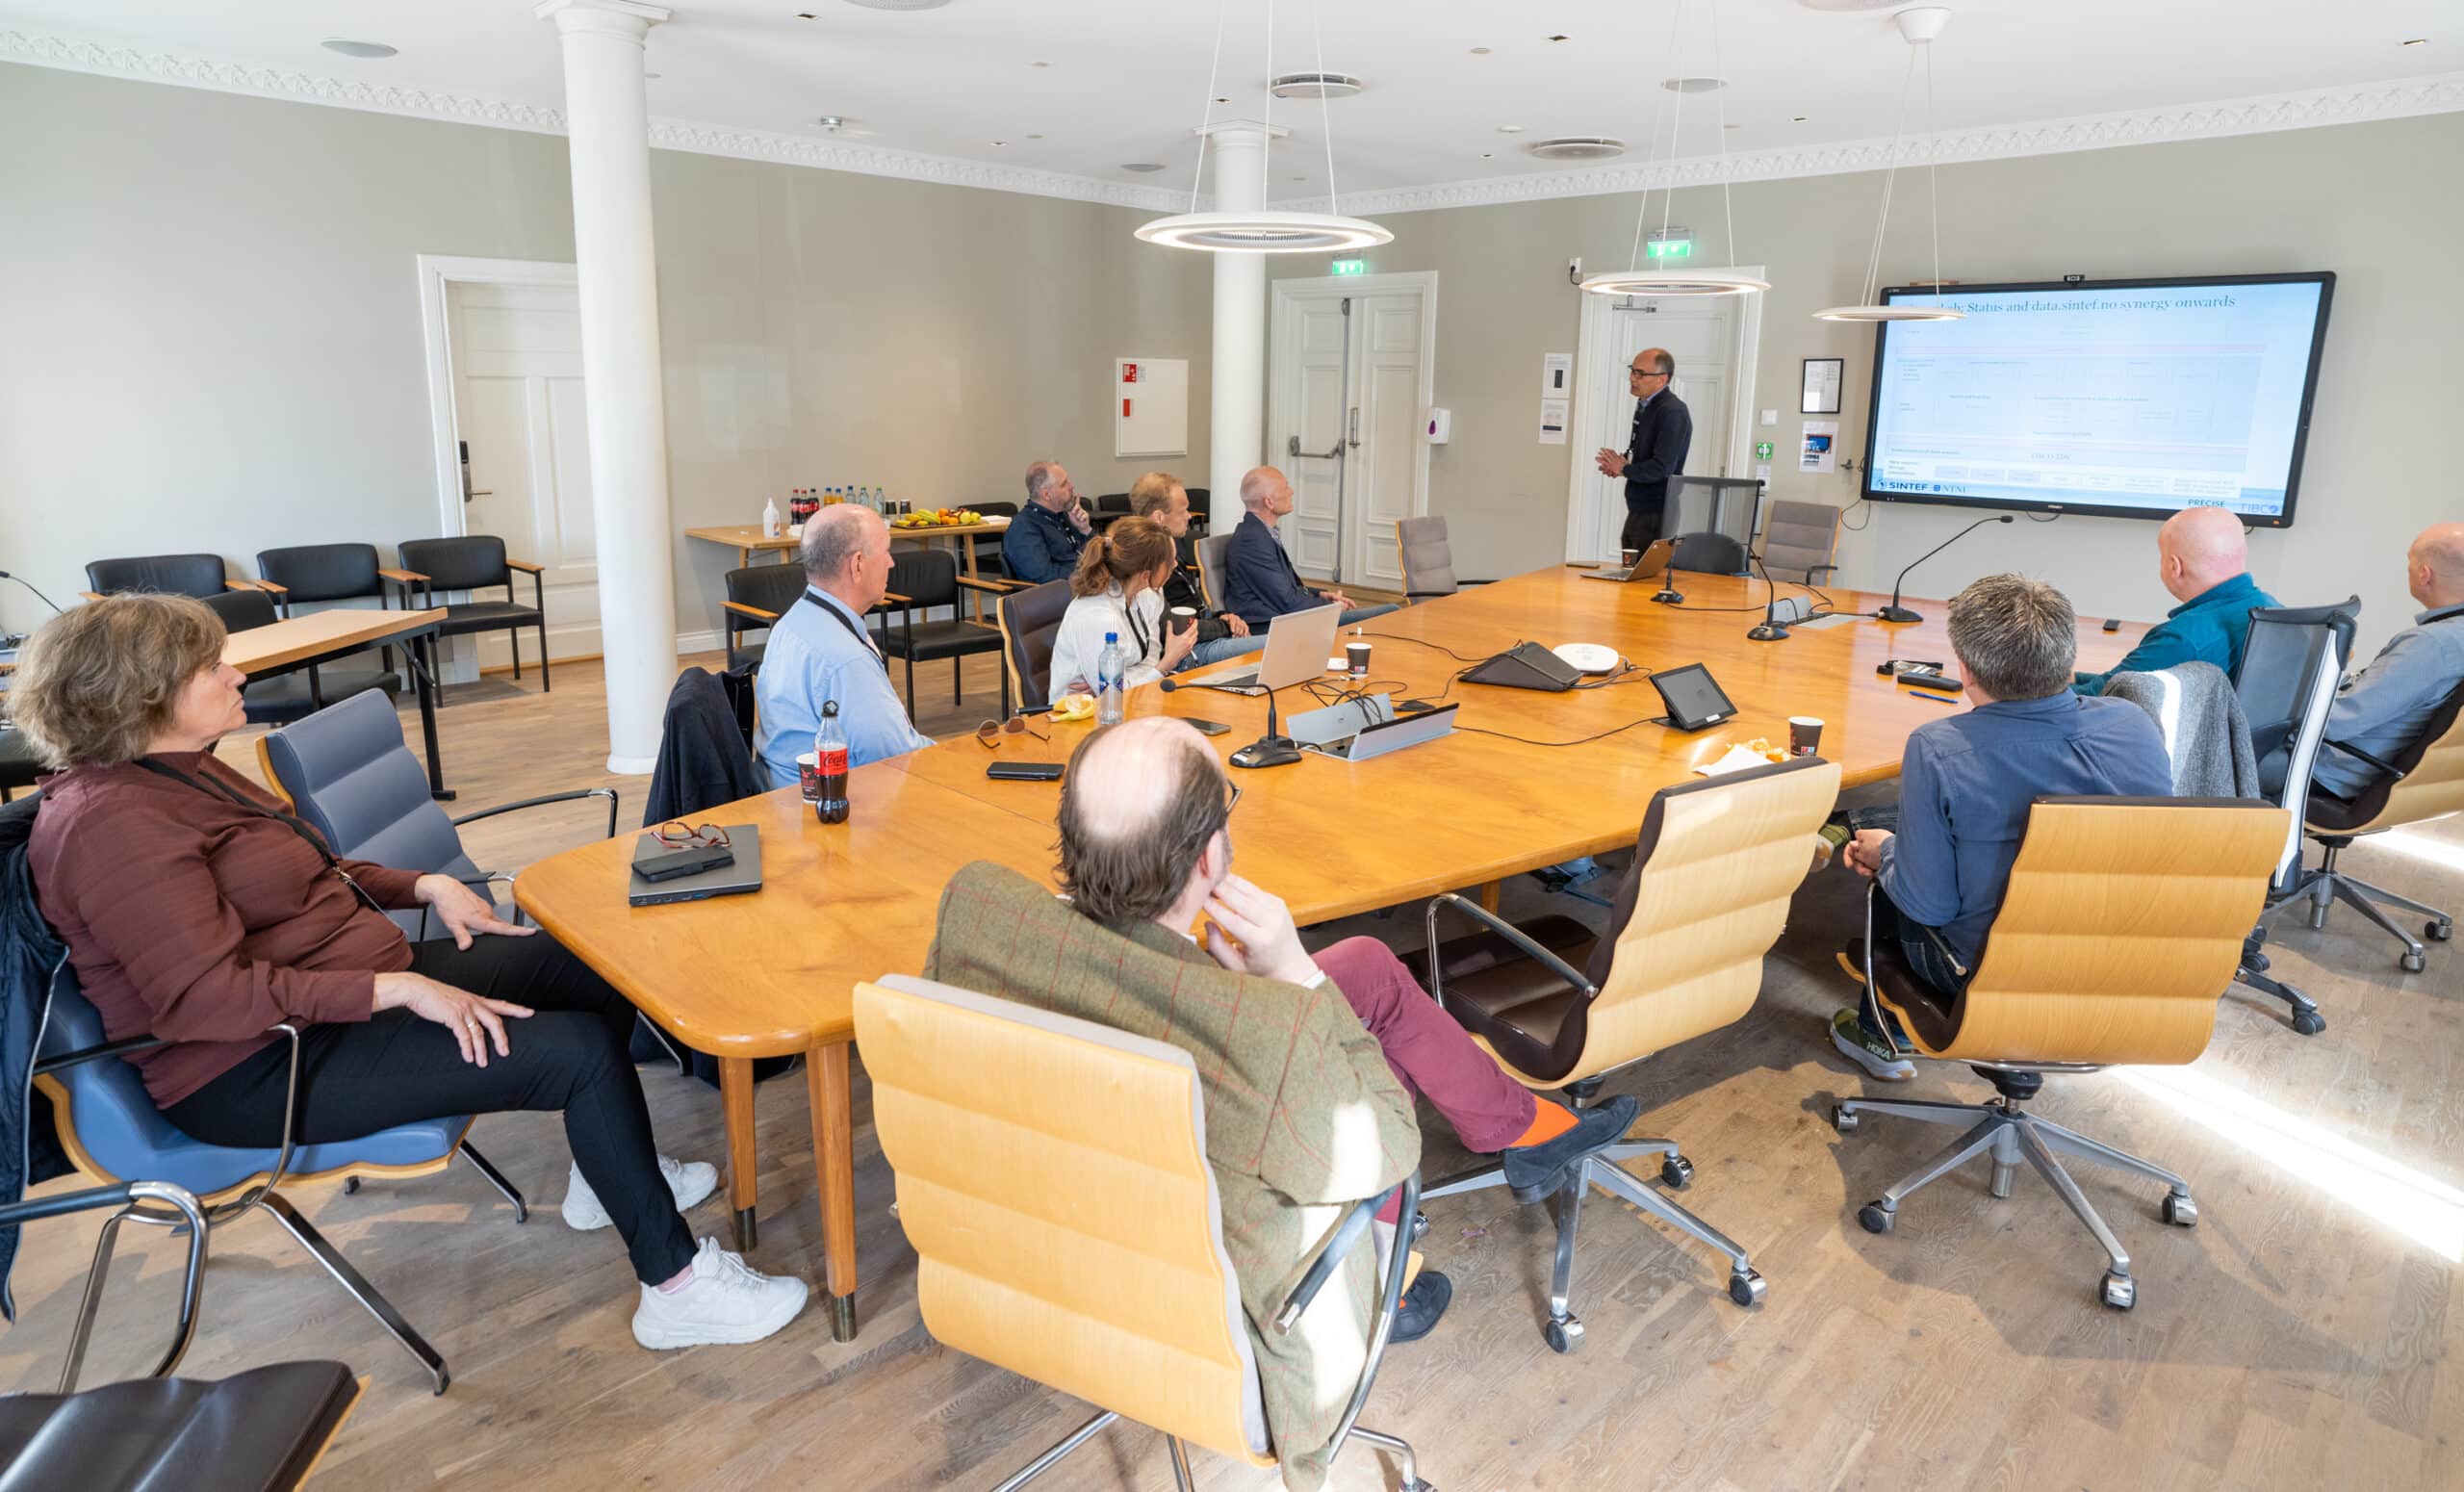 Per Baumann from Precise Prediction joined the session organised by Halden municipality. PHOTO: Stein Johnsen, ContentVideo